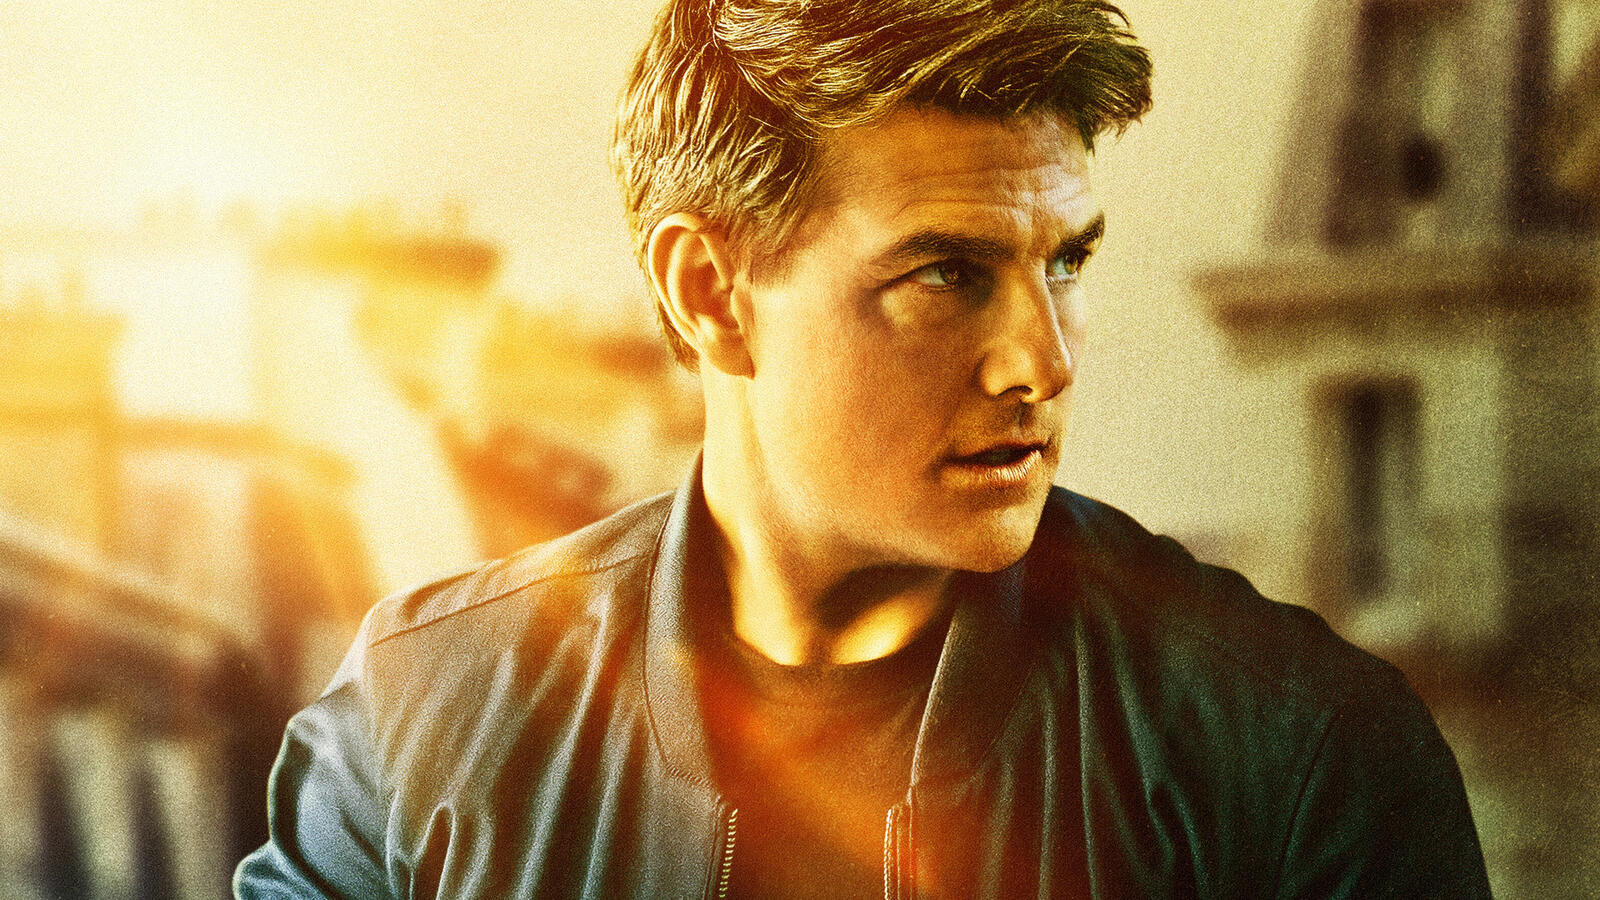 Wallpapers movies Tom Cruise mission Impossible on the desktop